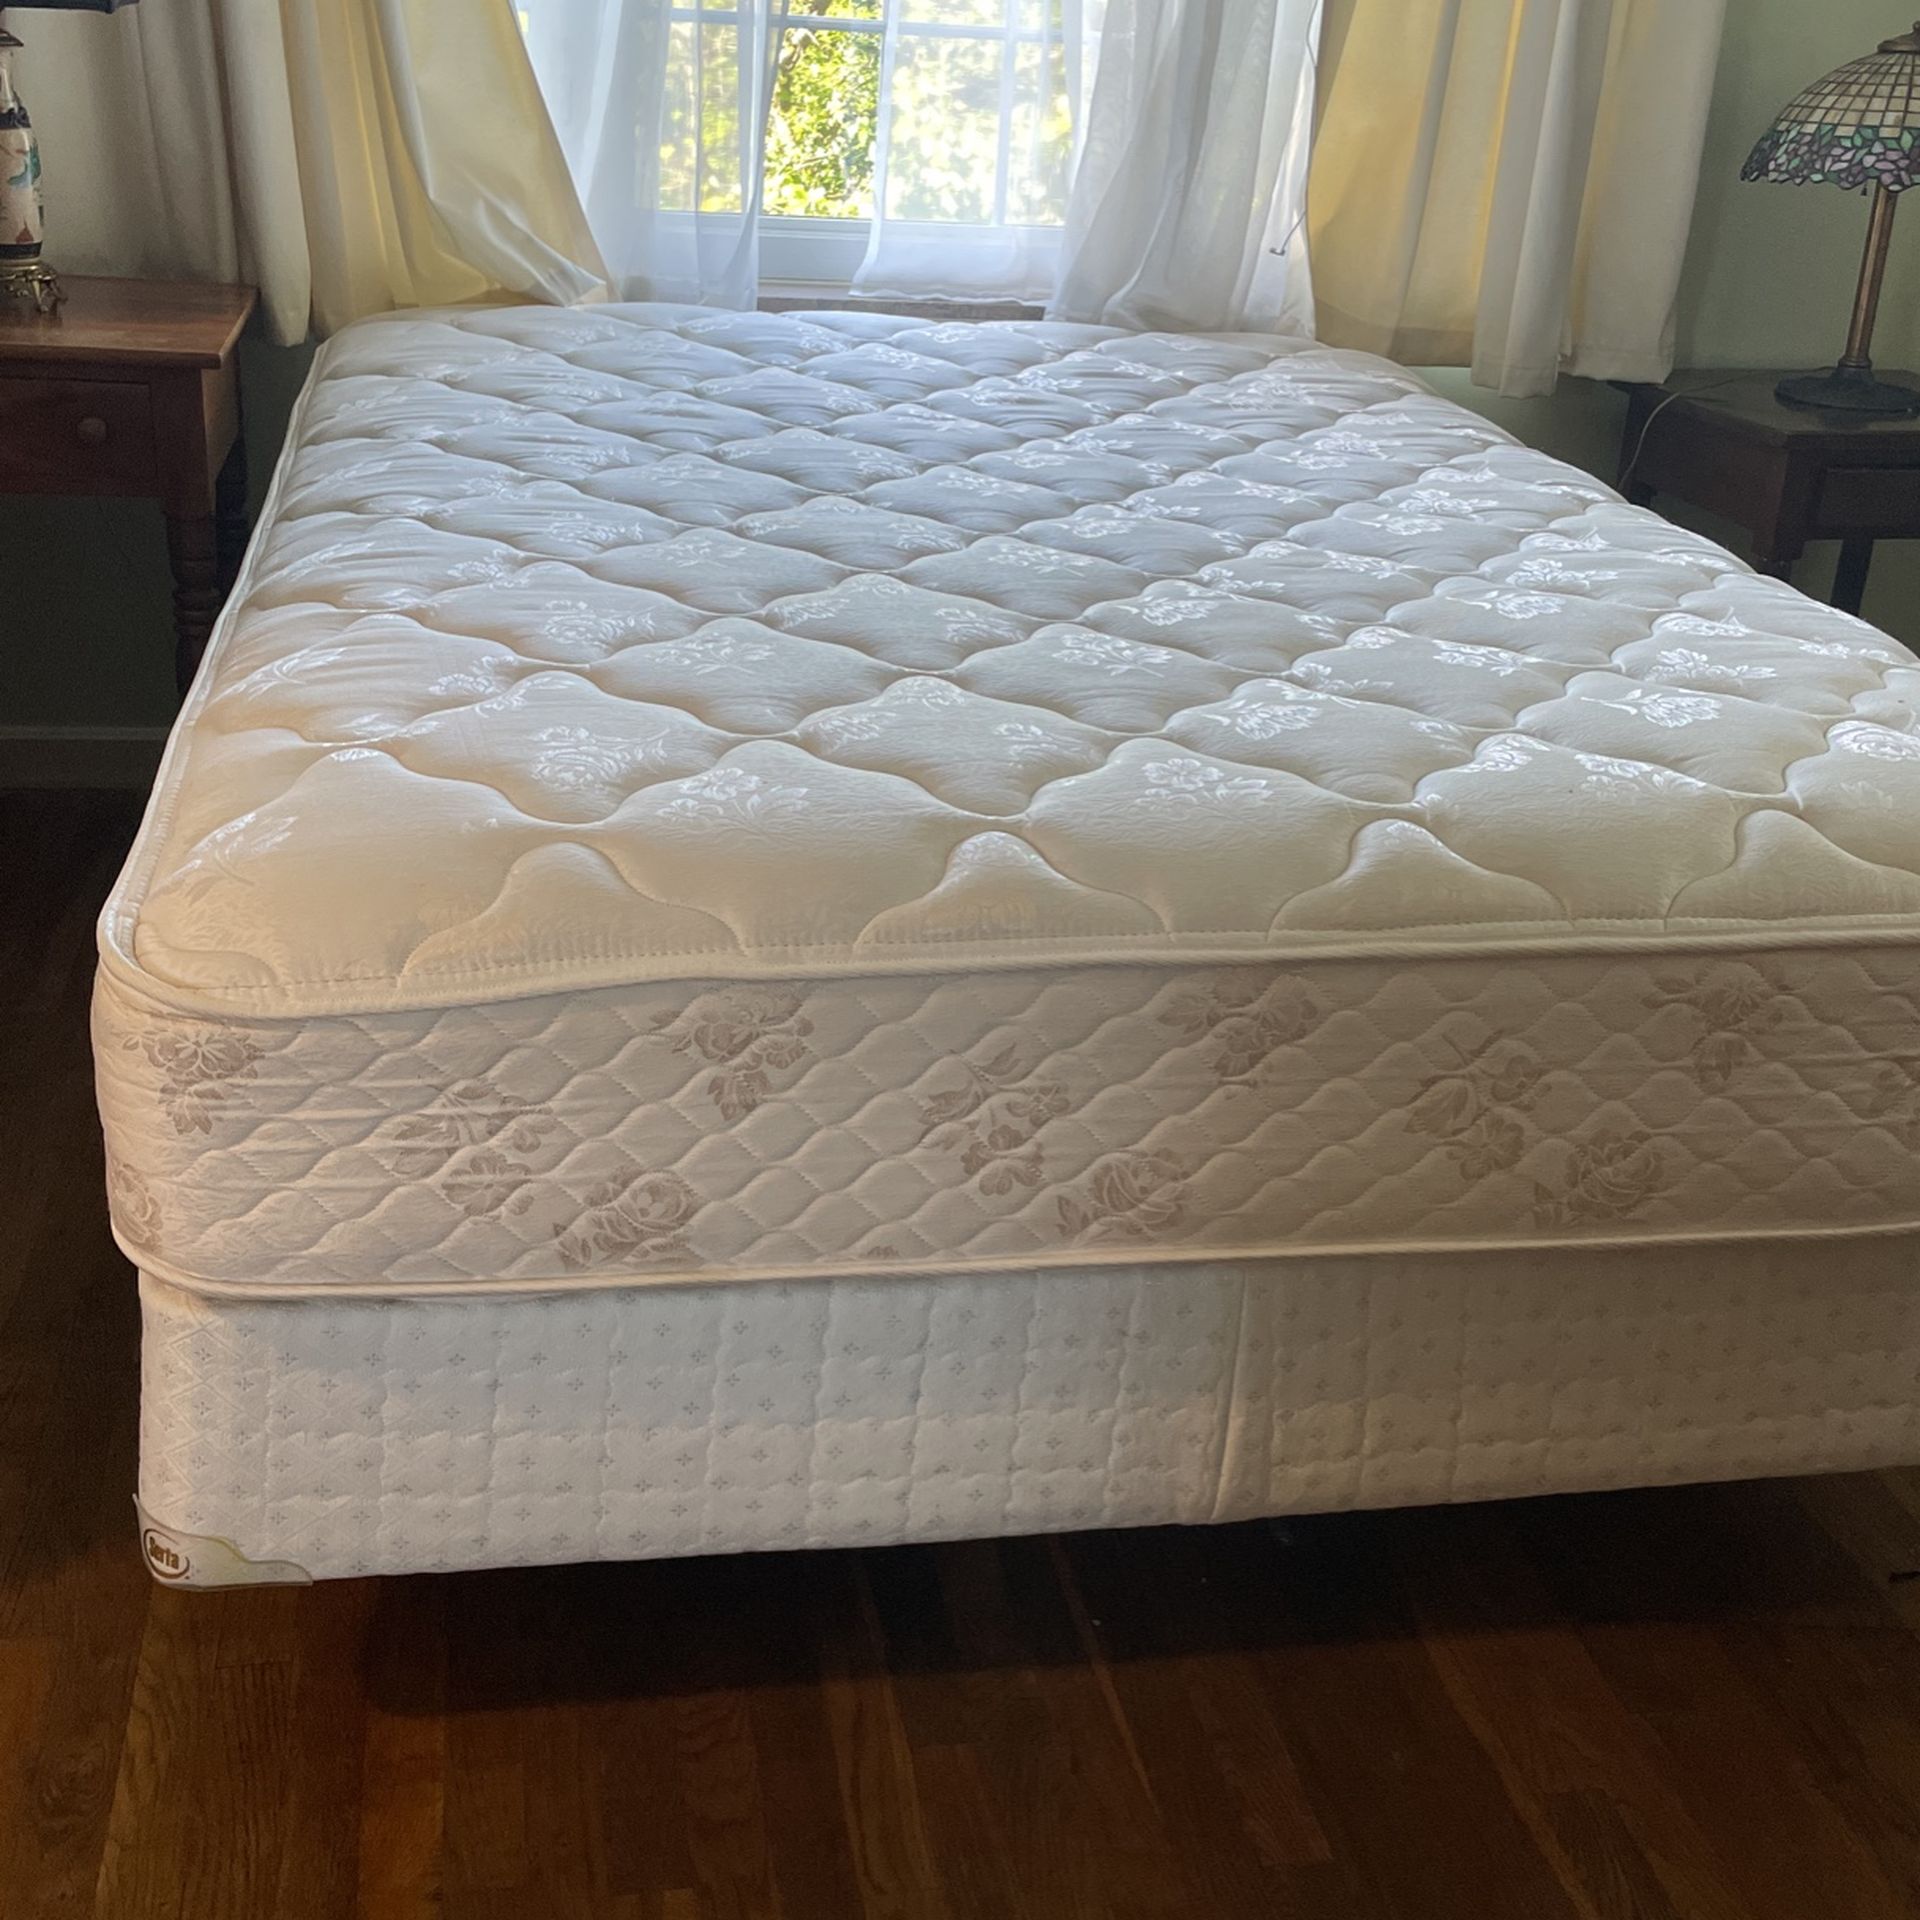 Queen Size - Orthopedic Plush Mattress With Boxspring And Frame 